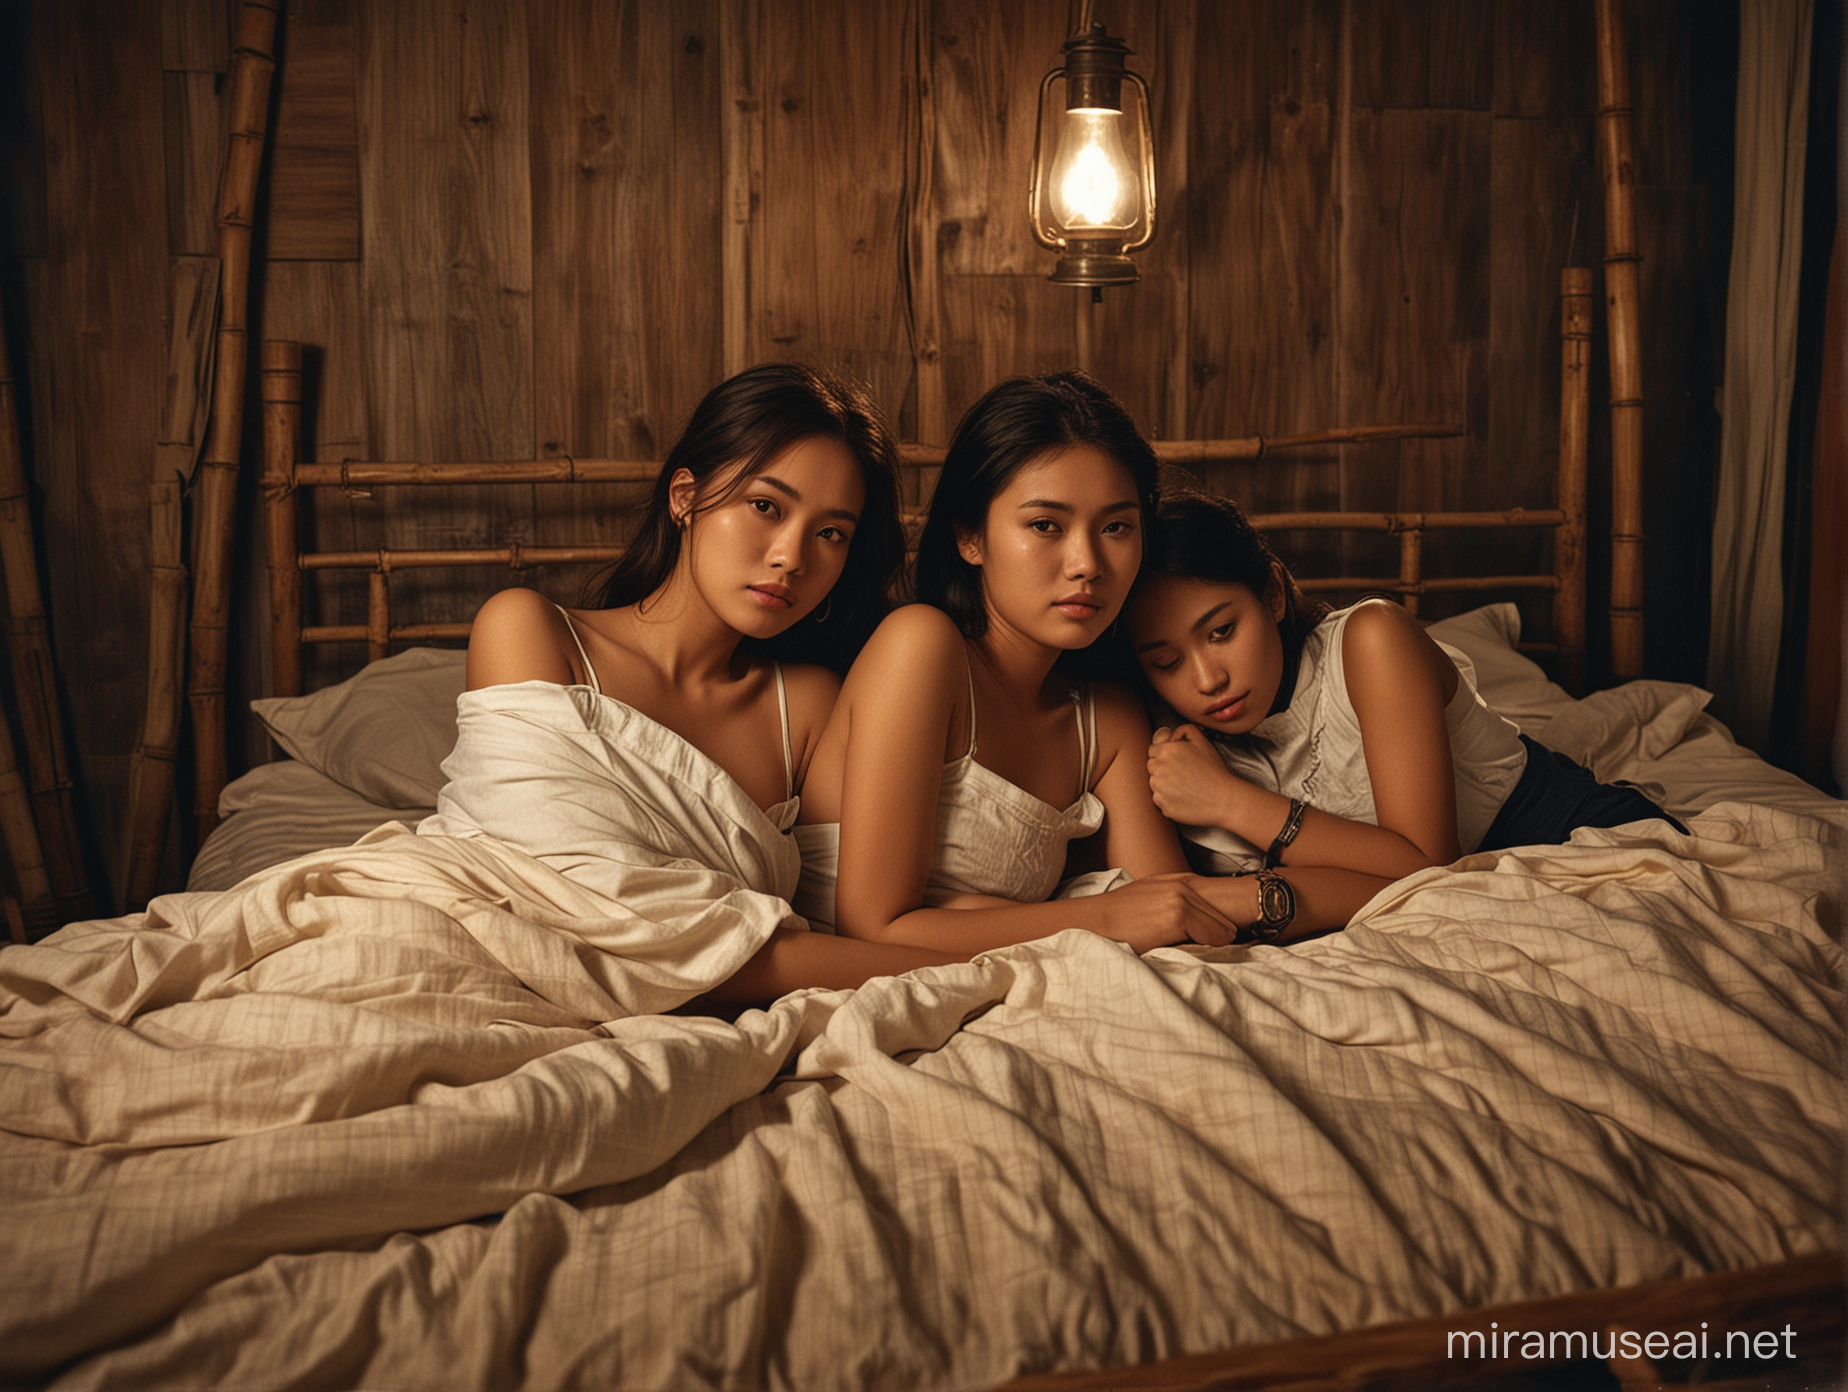 Two young Filipino female bestfriends having a sleepover, they are sleeping with clothes facing away each other on the bamboo bed, one of them is wearing a wristwatch, the room has old wooden walls and floor and dimly lit from an antique oil lamp, the setting is 1950s 
province in the Philippines, dark, cinematic, foreboding